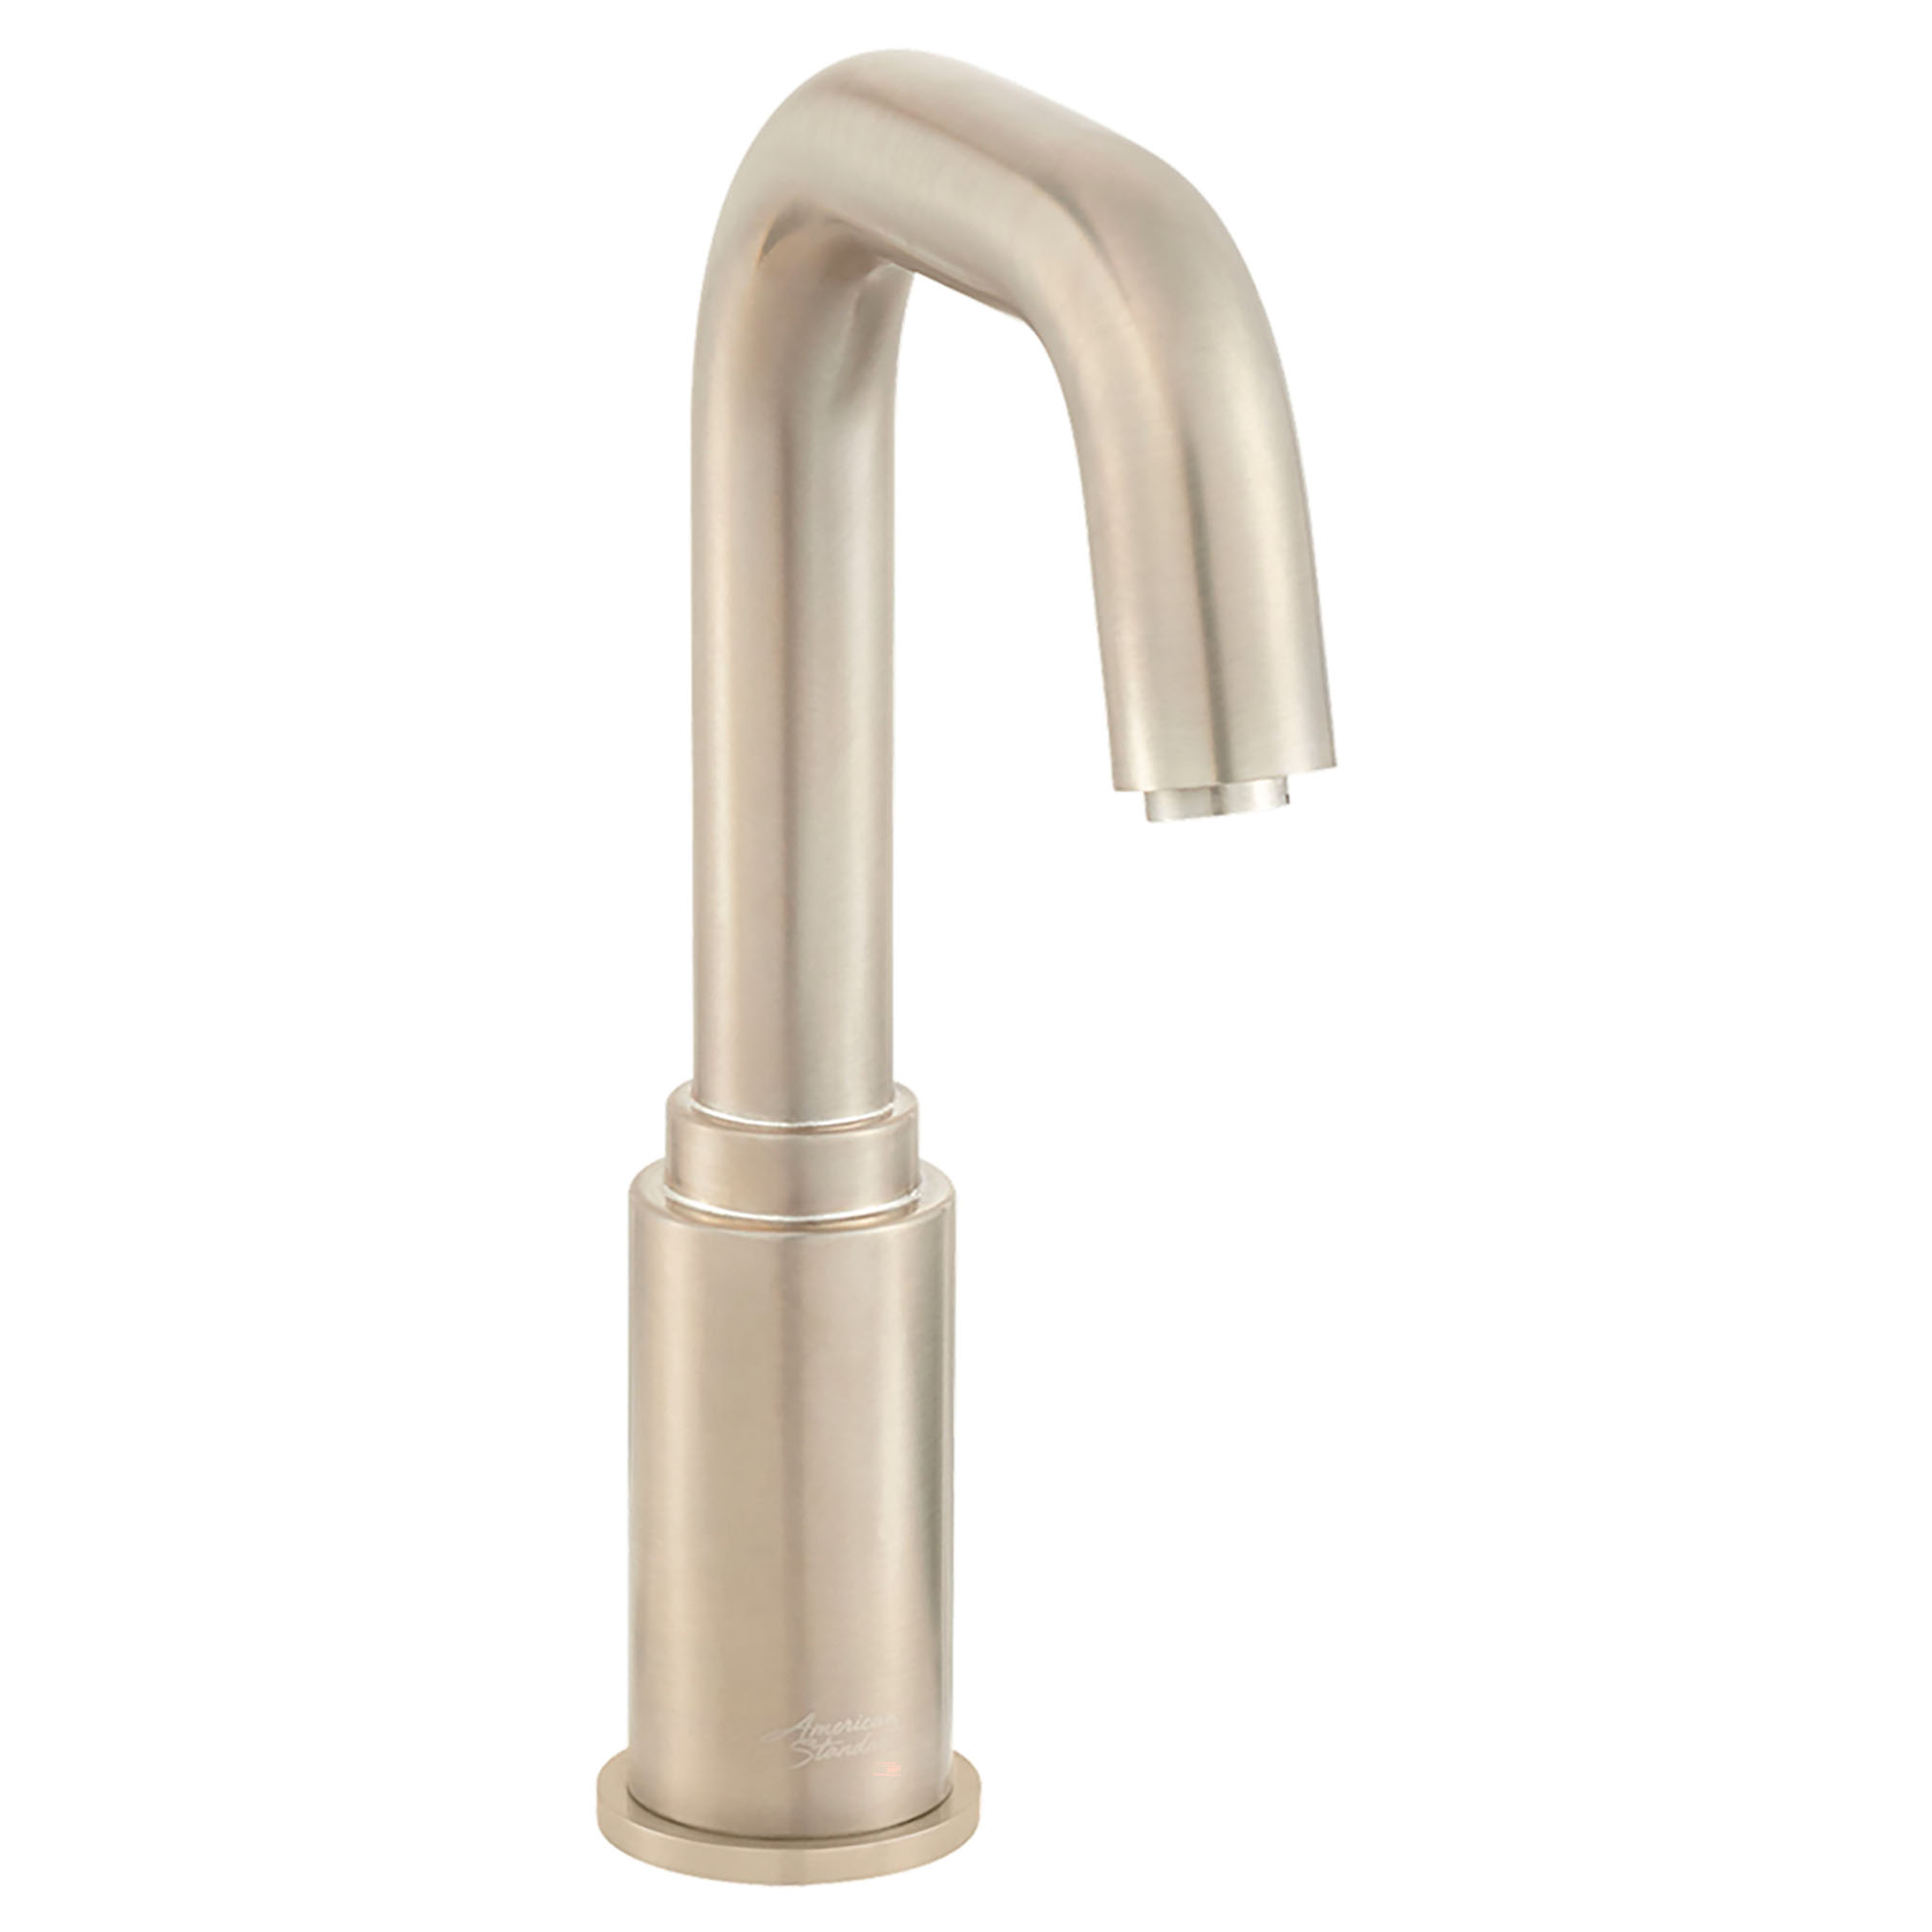 Serin™ Touchless Faucet, Base Model, 0.35 gpm/1.3 Lpm